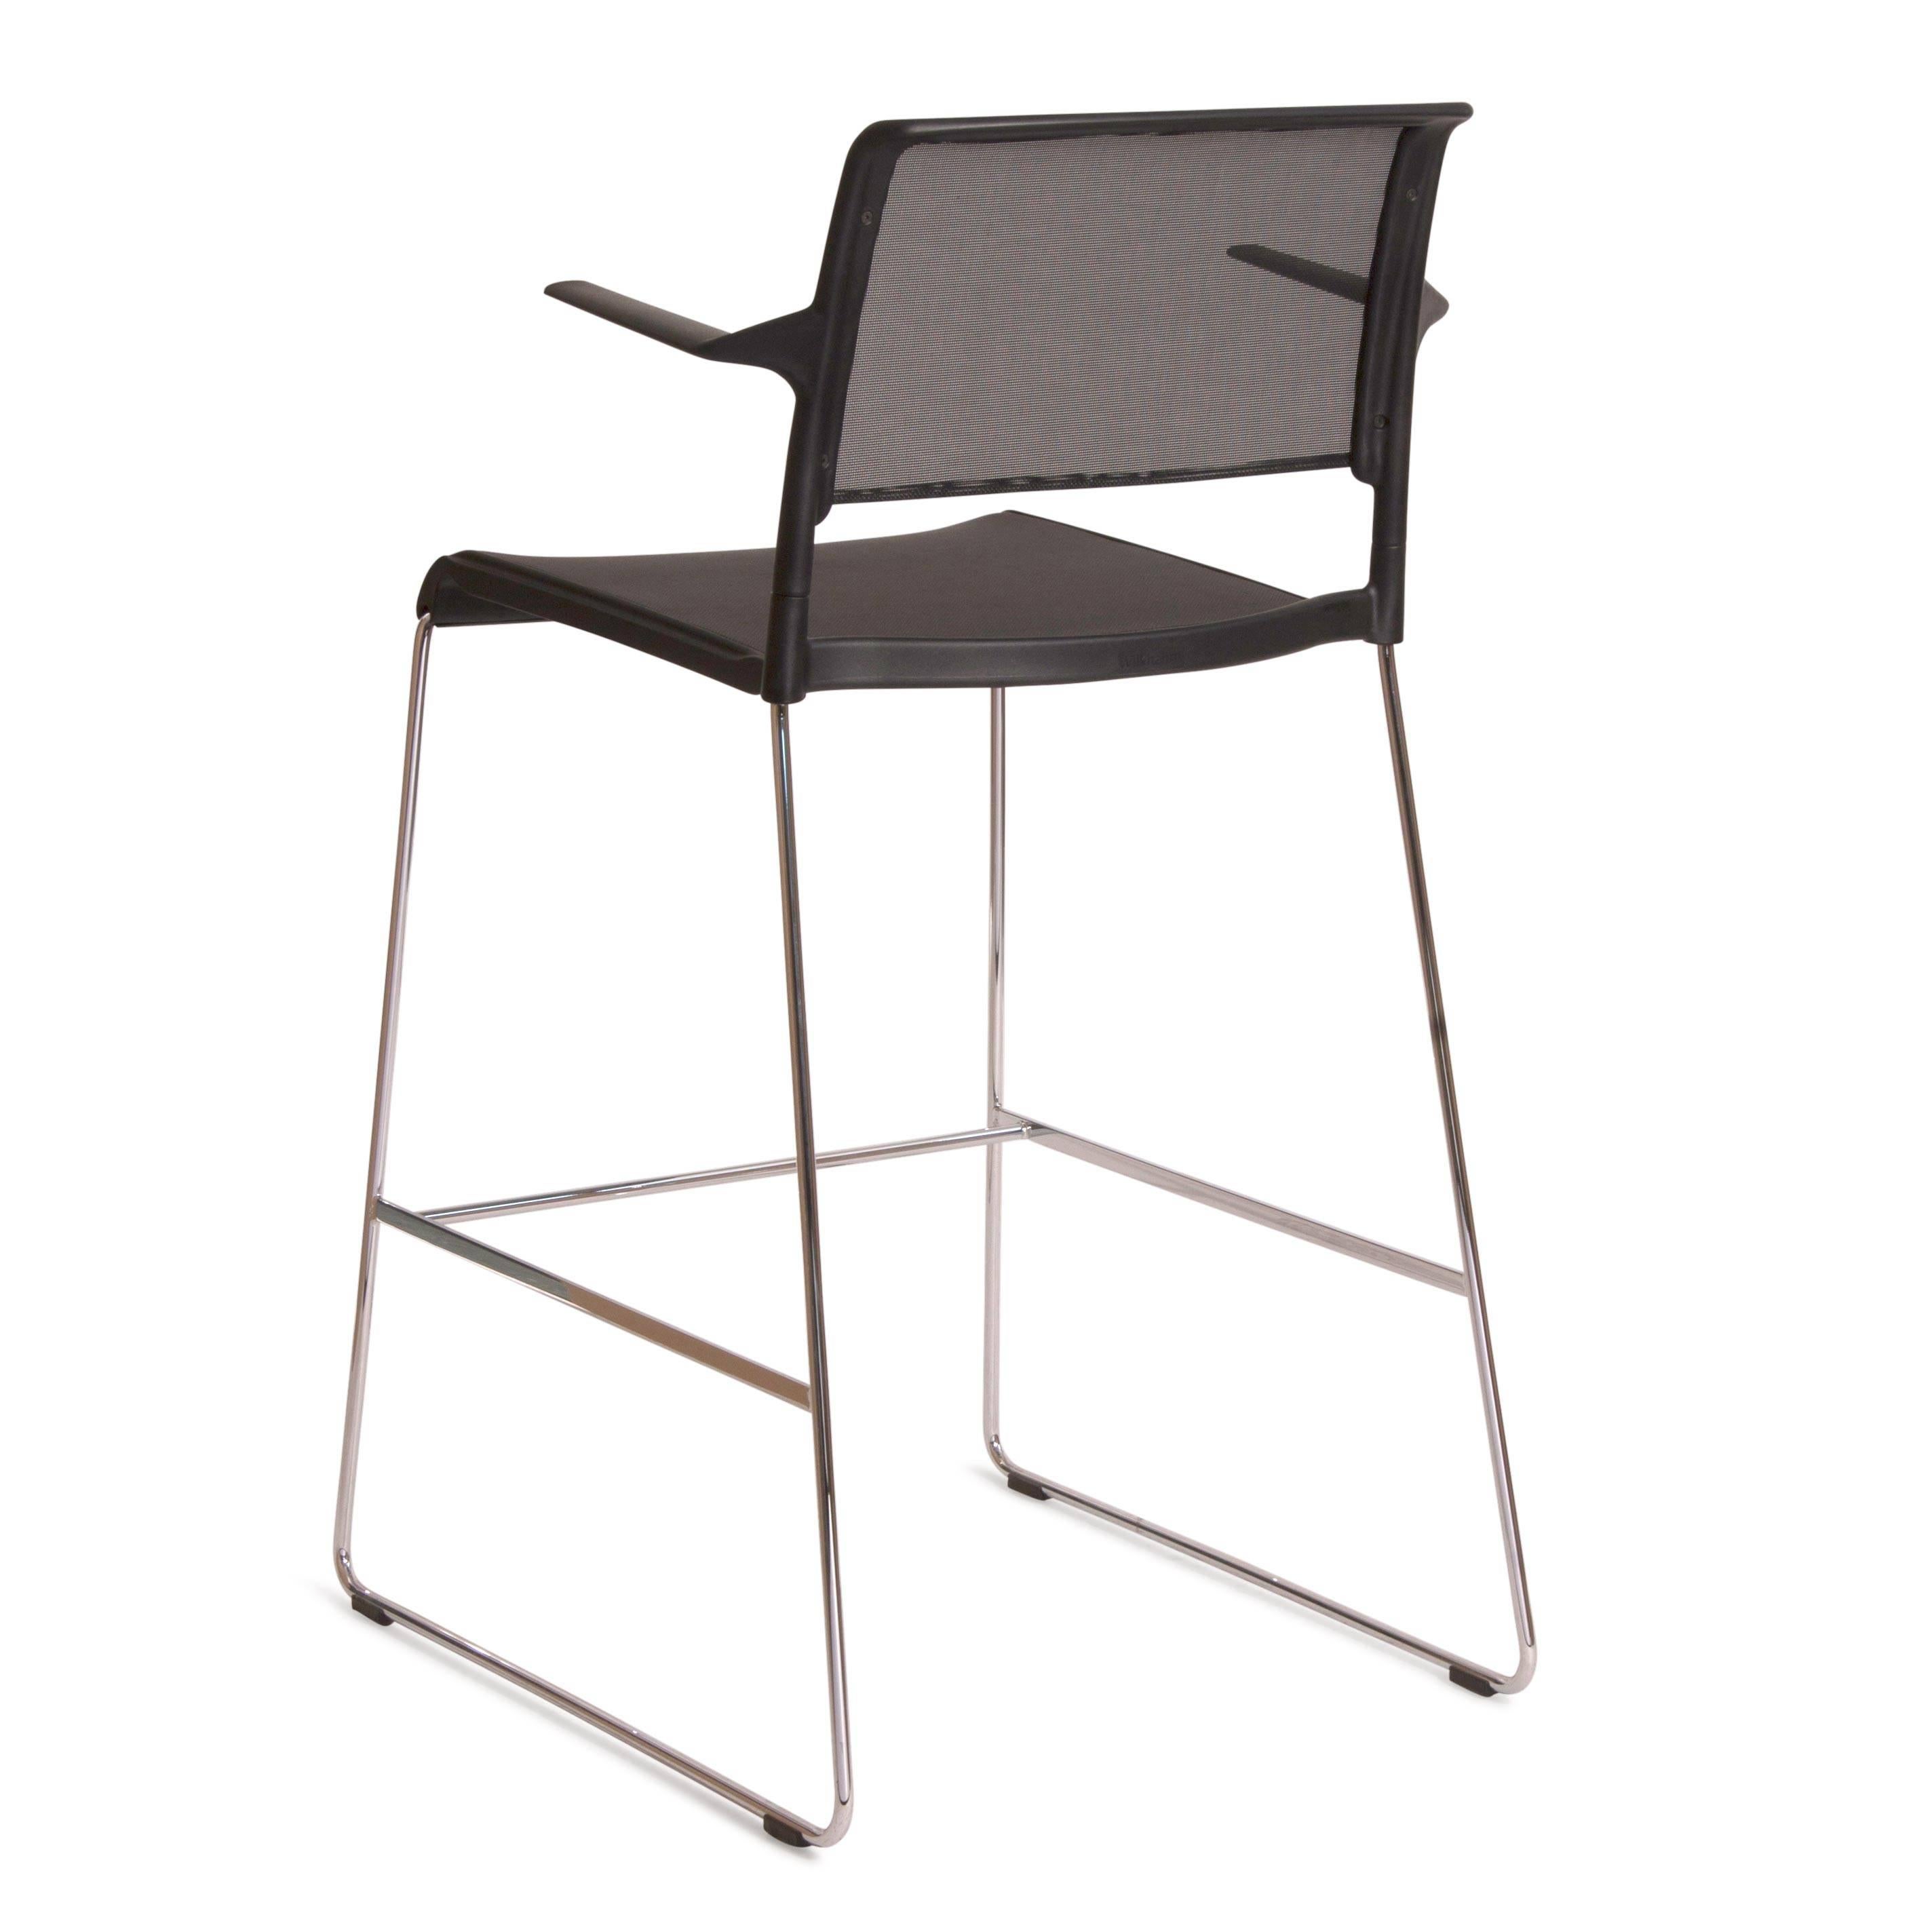 Black Aline 230/6 Counter Stool High Chair by Storiko for Wilkhahn, Germany In Good Condition For Sale In Brooklyn, NY